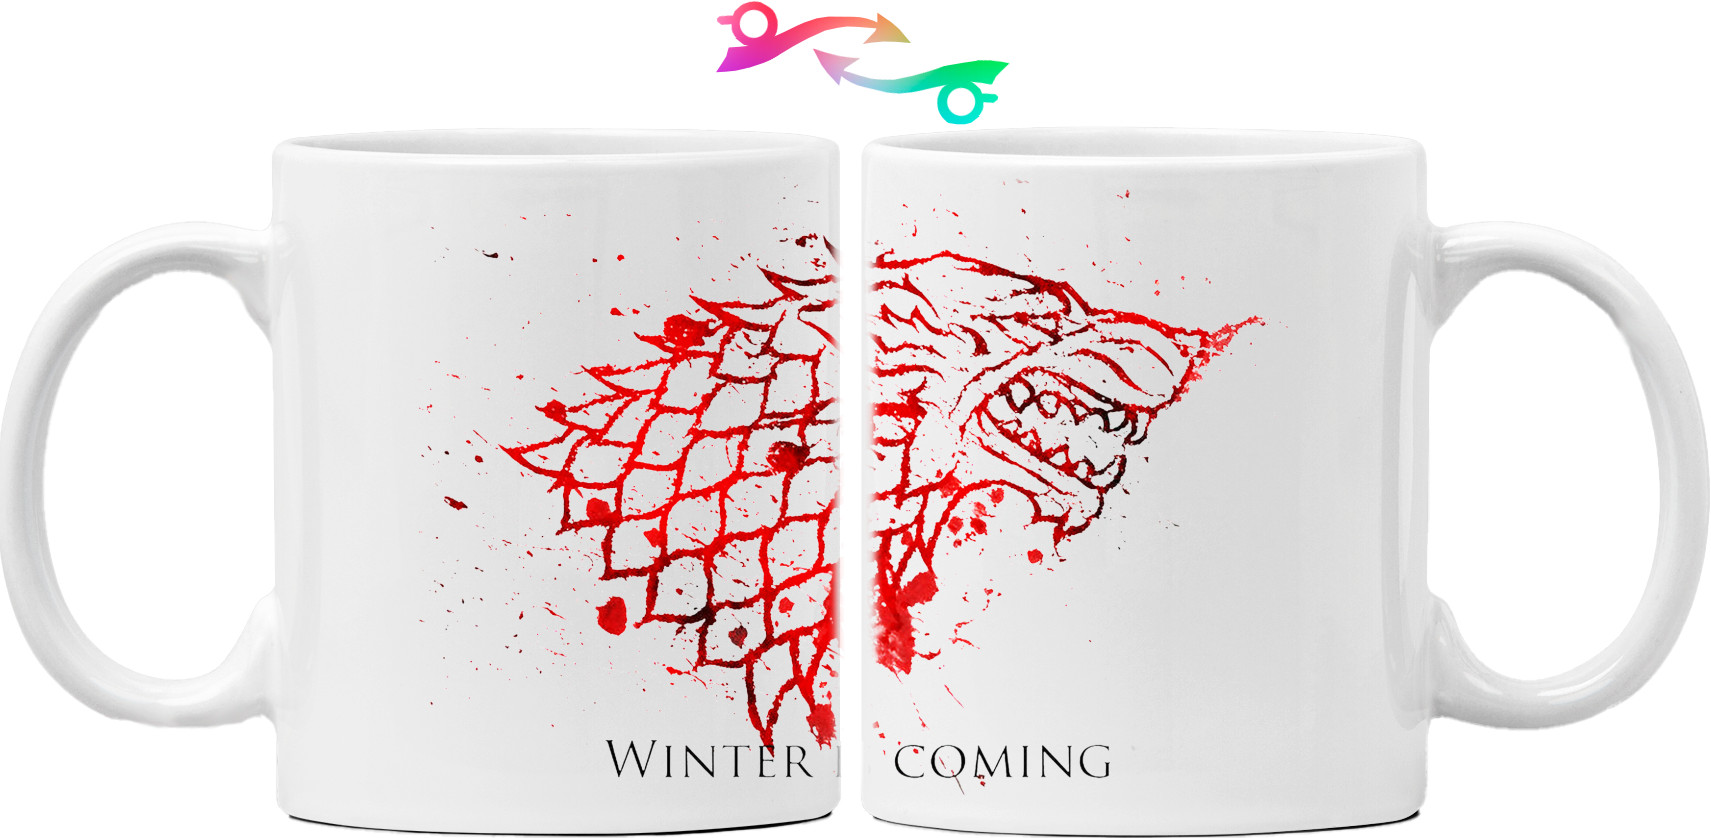 Winter is coming 1